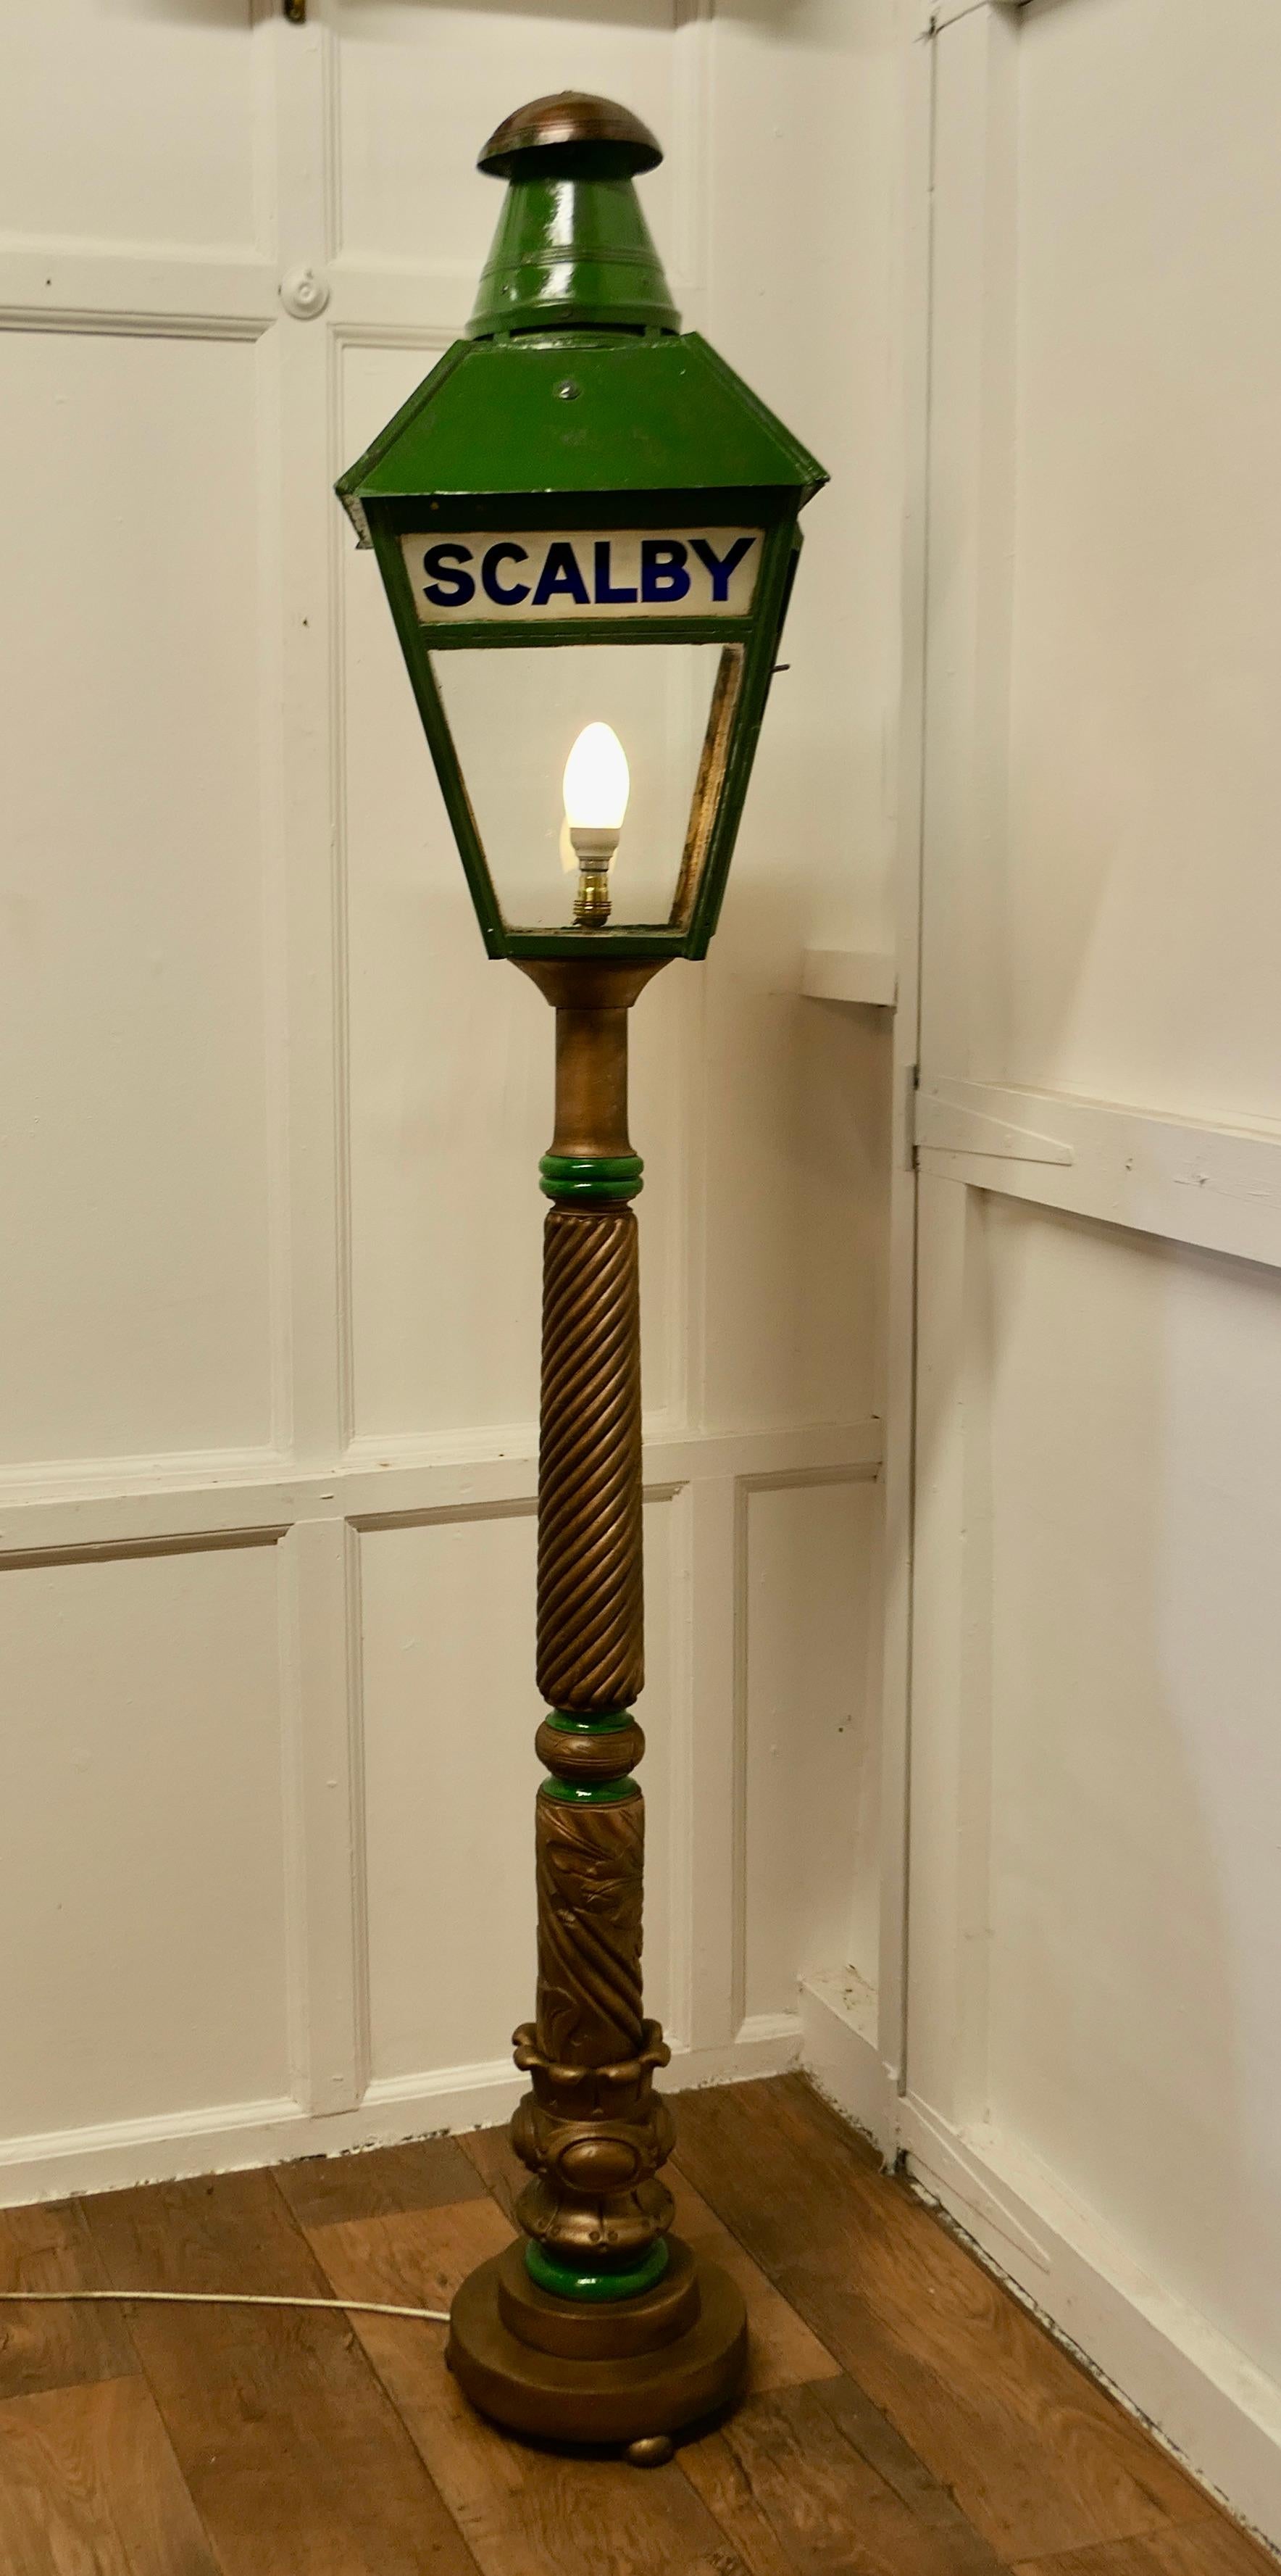 Floor Lamp Lantern from Scalby Station N.E.R. set on a Column

A Lovely looking piece, the top of the lamp is original with SCALBY in the glass at the top of one side only, the lamp is in green with a copper heat deflector
The Lantern has been set